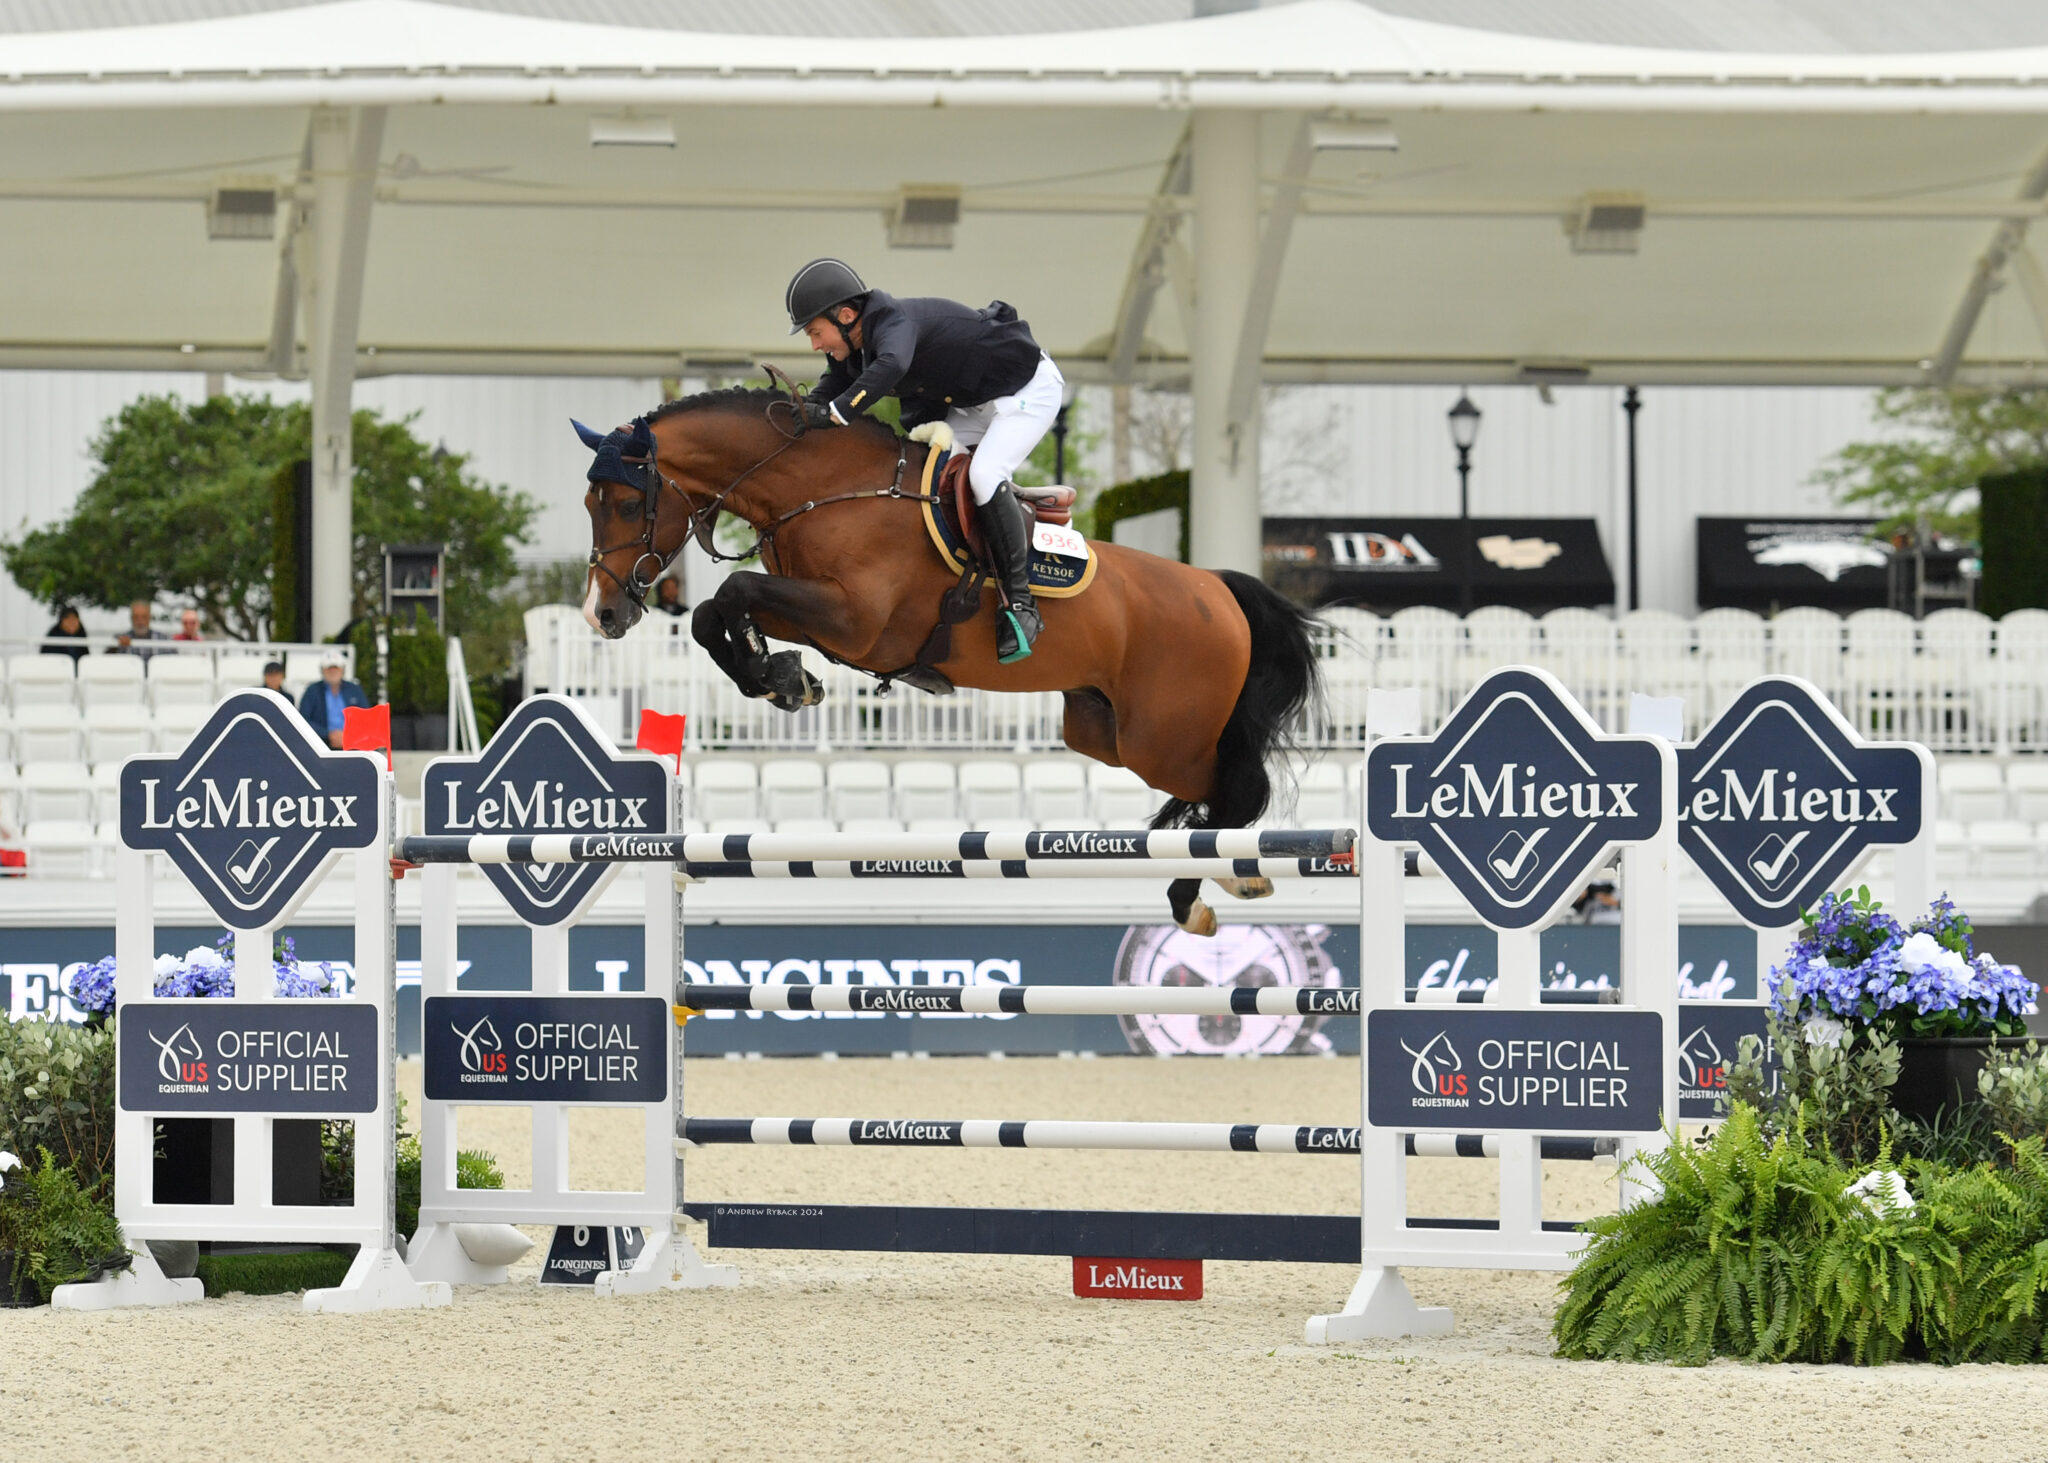 Cian O'Connor and Fermoy produce winning round in Ocala!